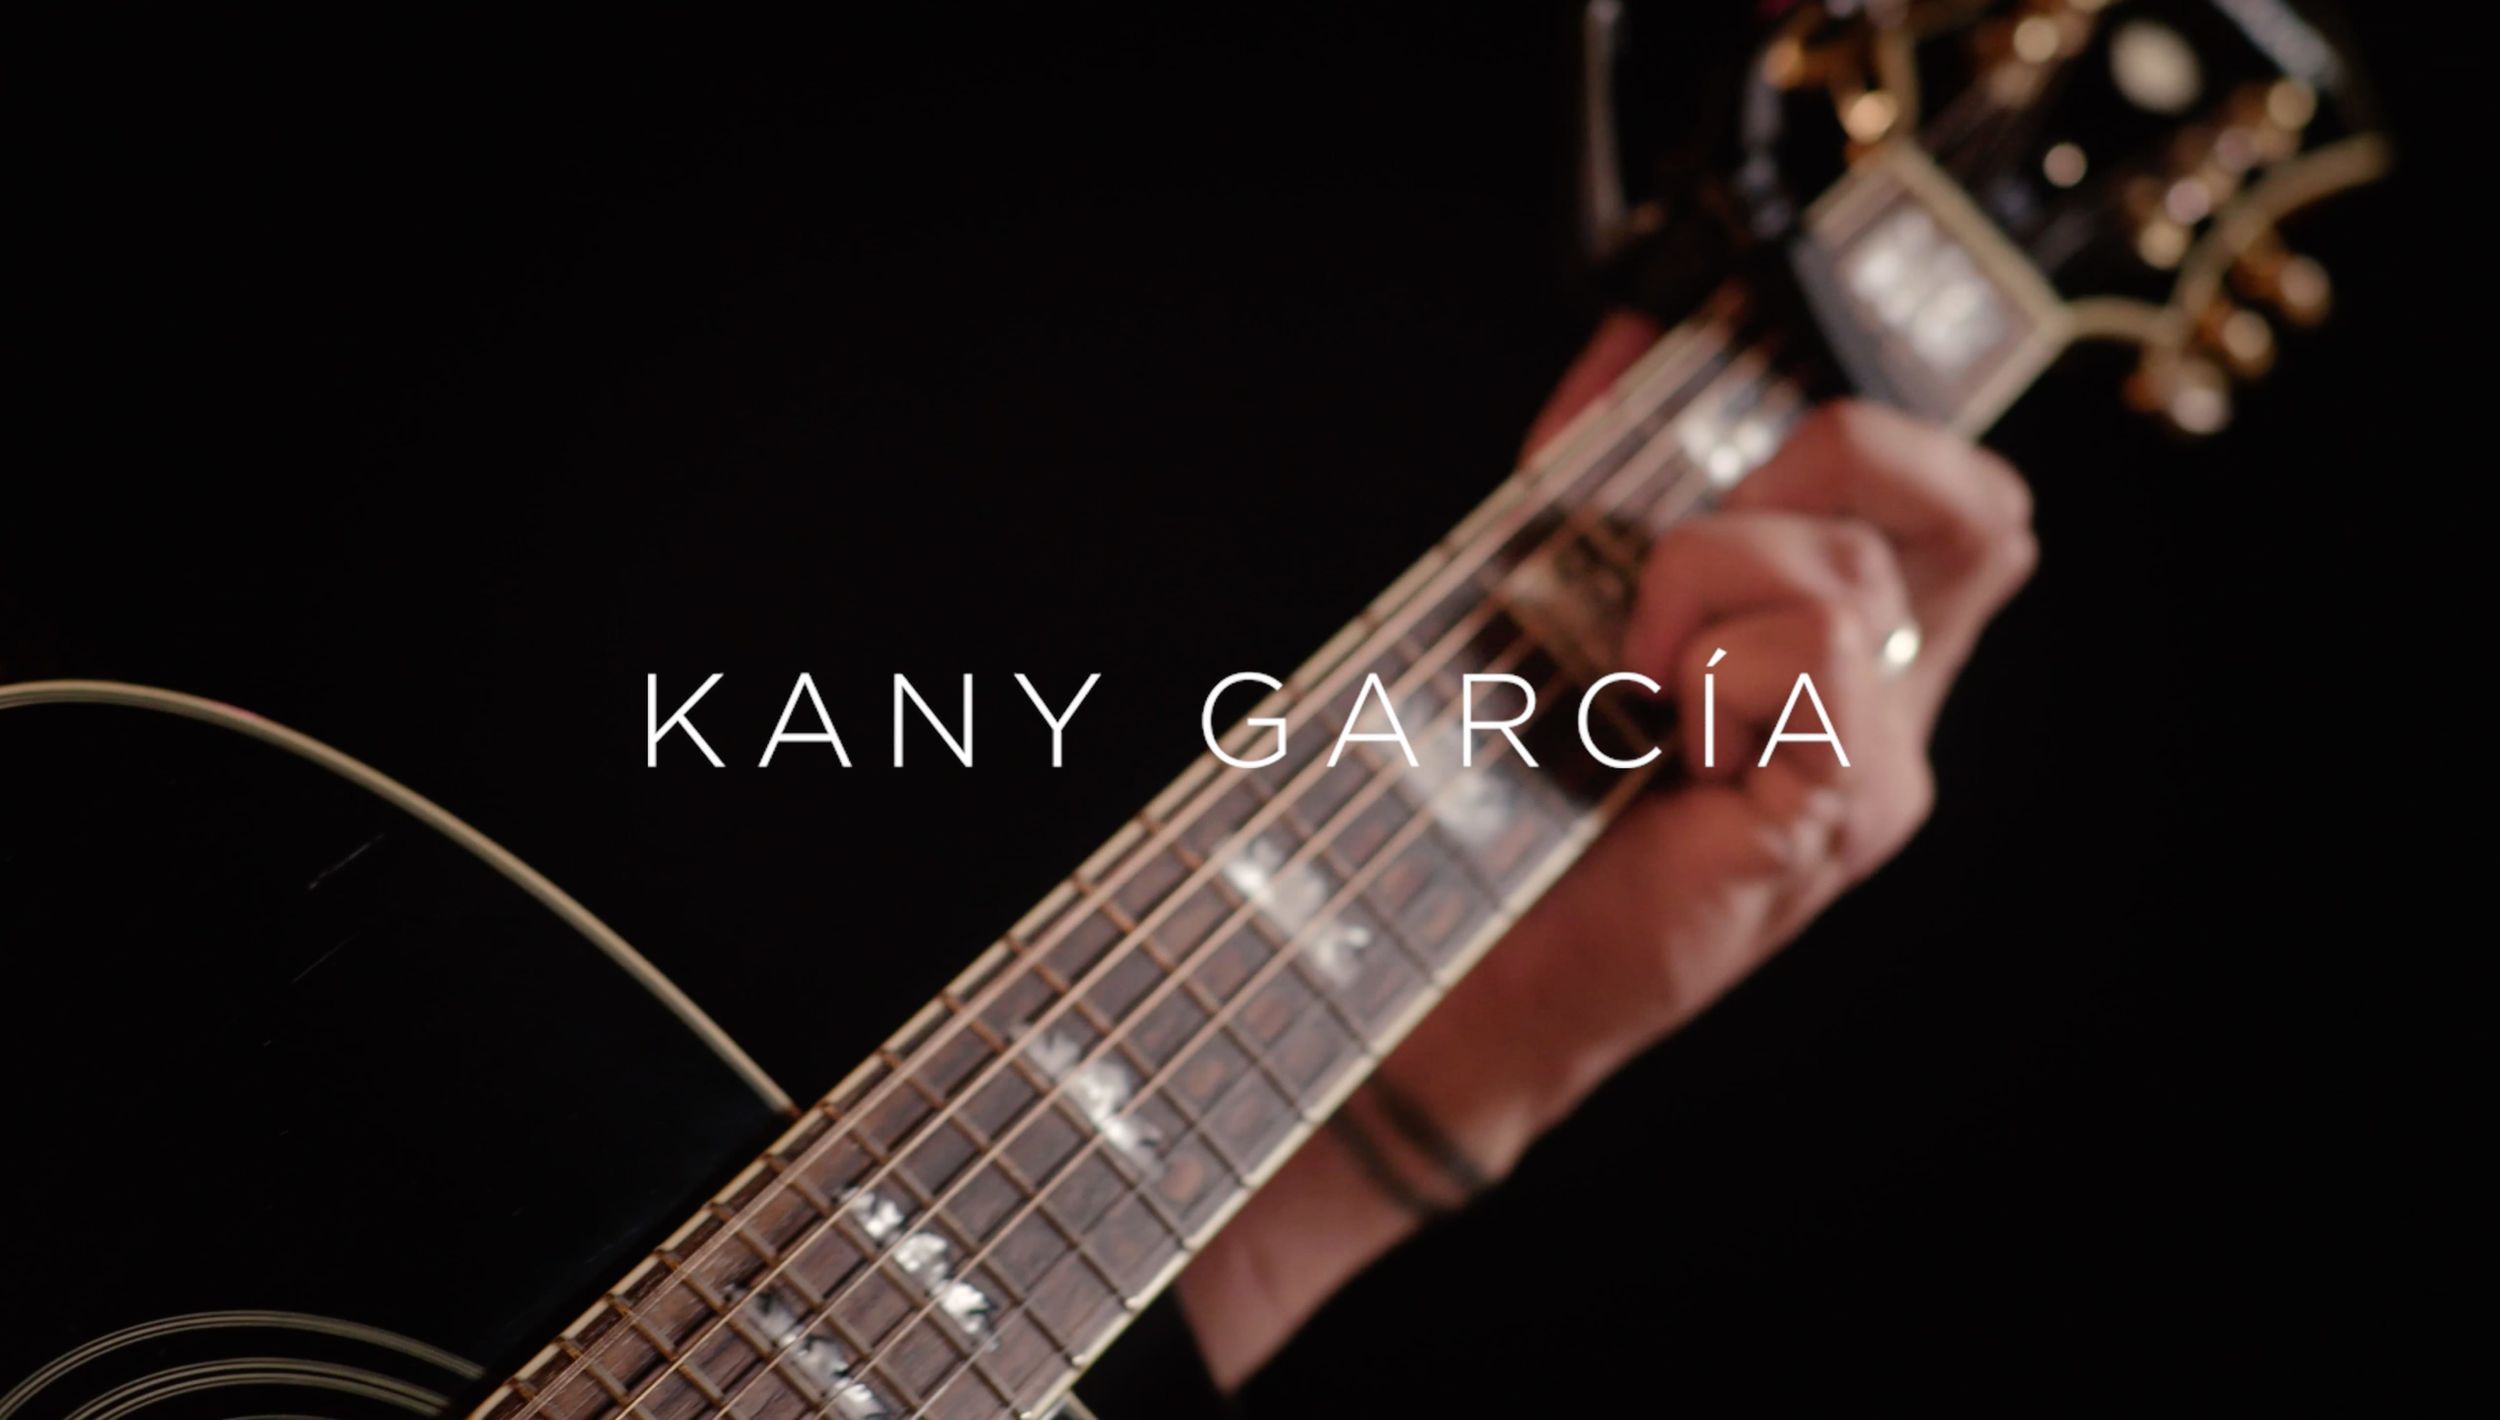 Kany Garcia performing her song Muero for our new LA Sessions.